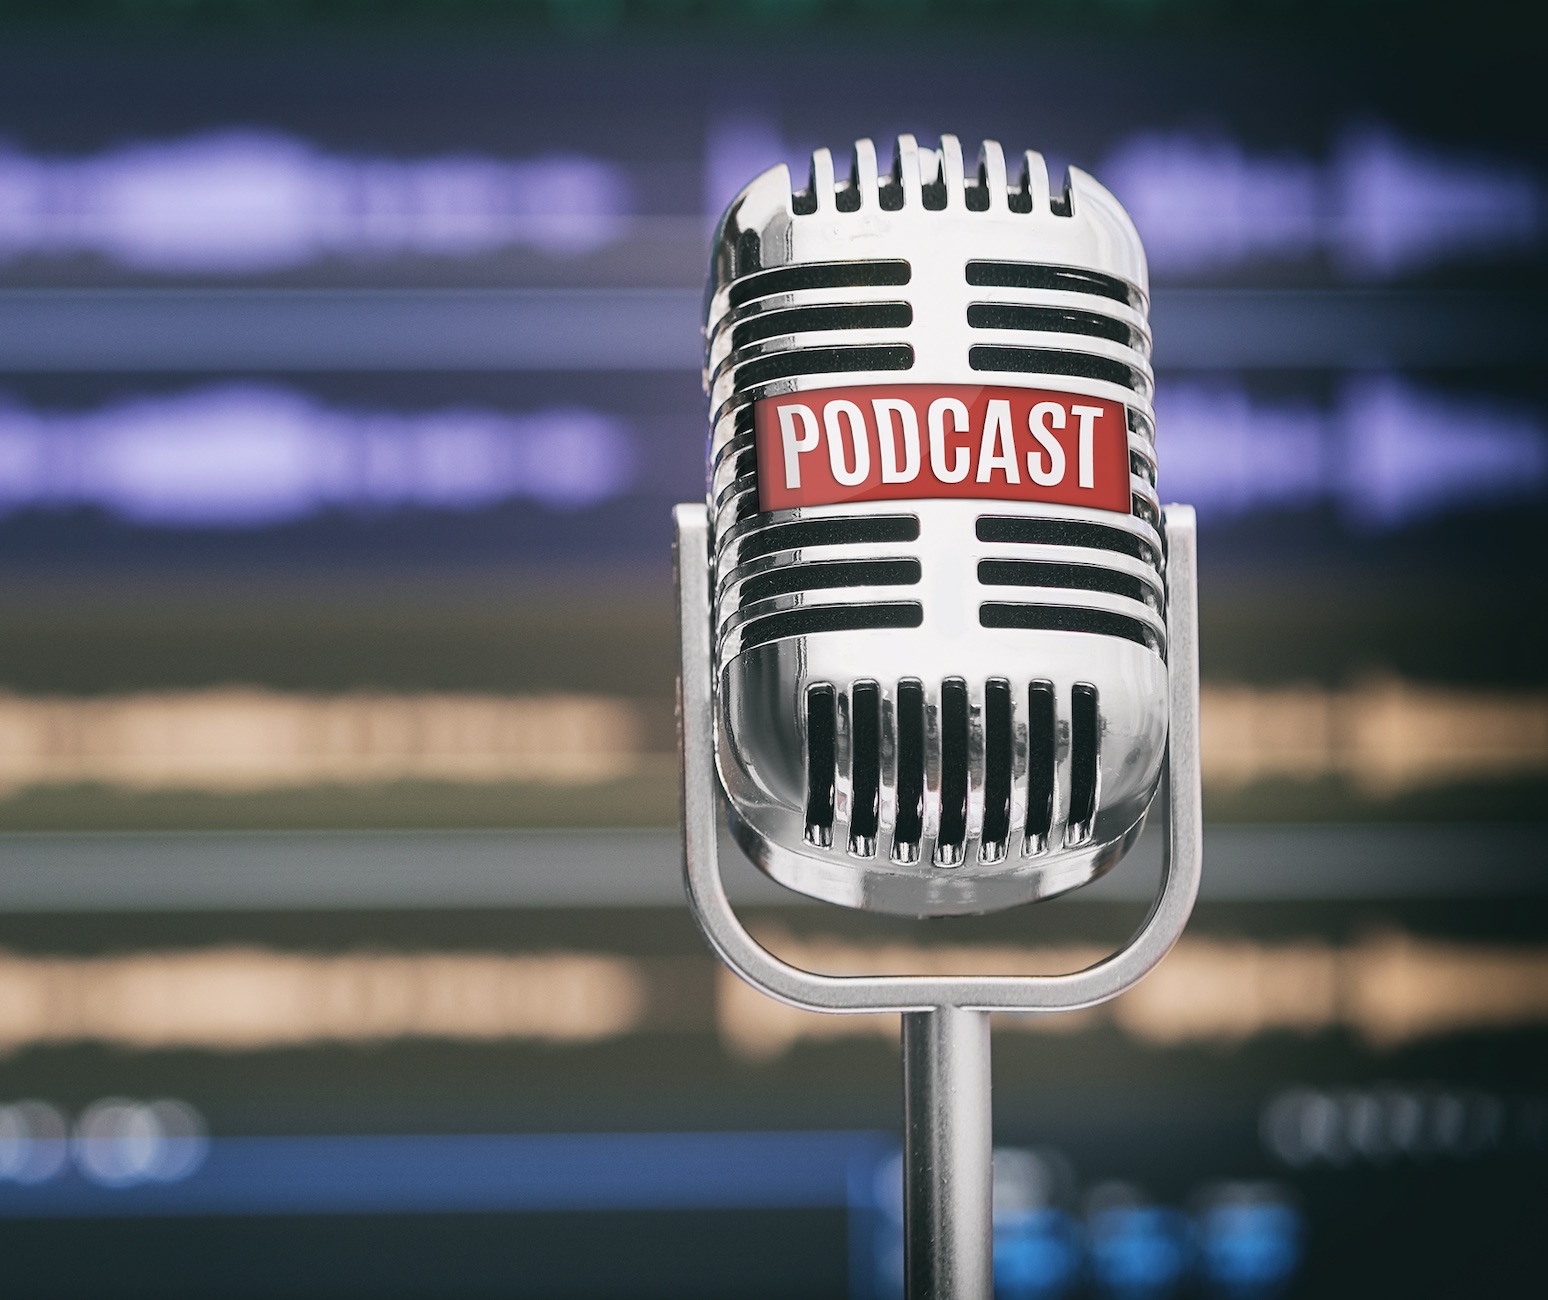 10 awesome podcasts you must listen to in 2021